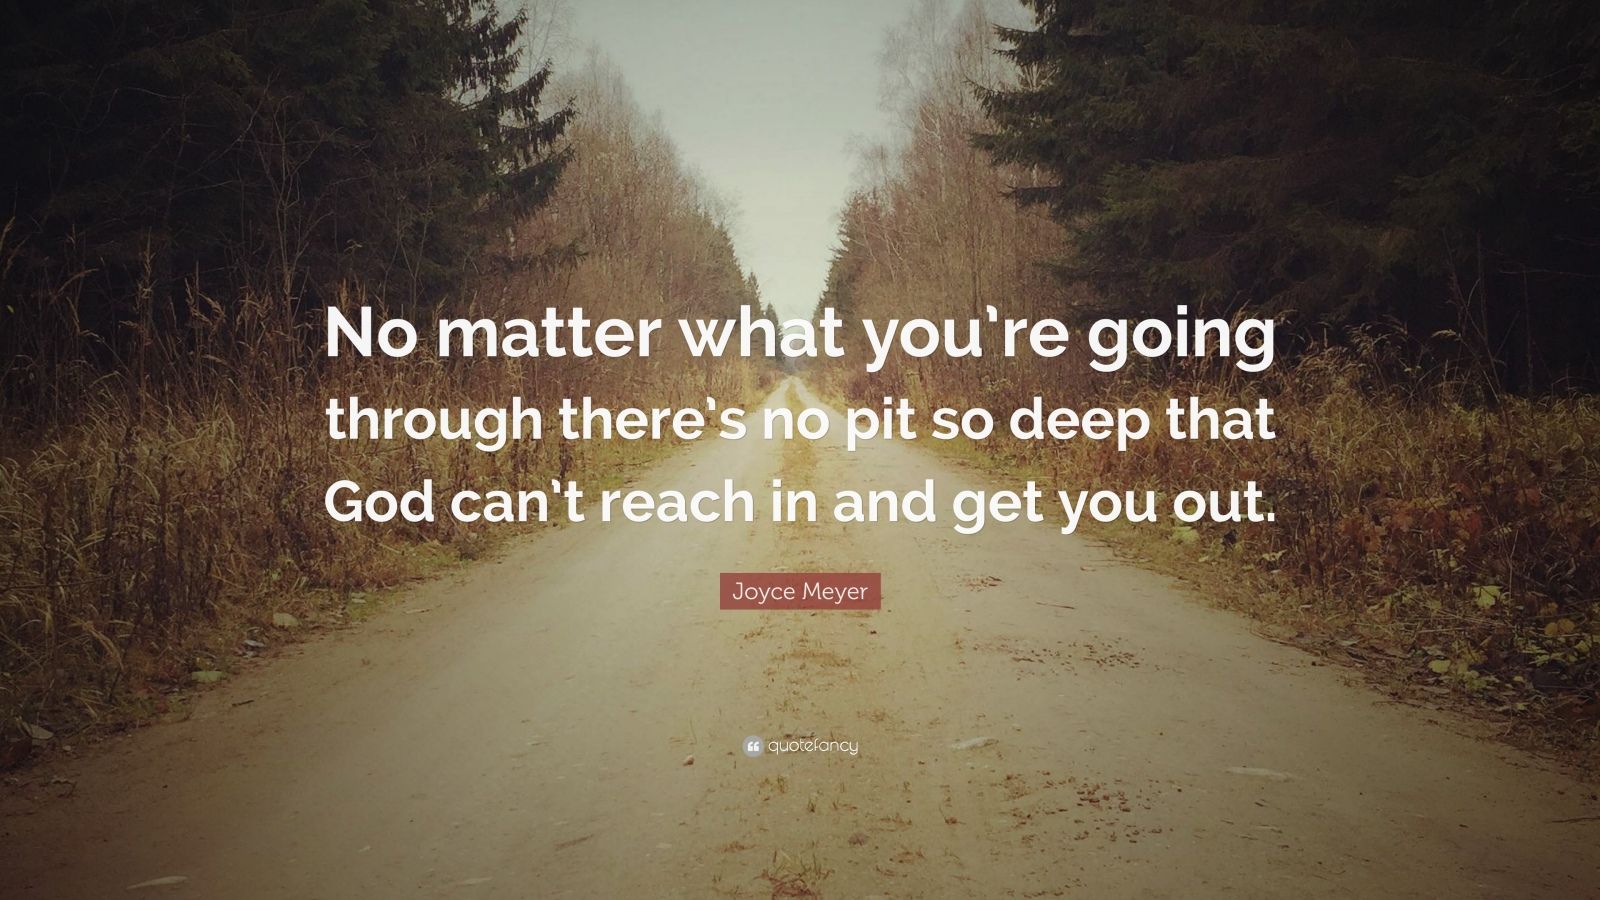 Joyce Meyer Quote: “No matter what you’re going through there’s no pit